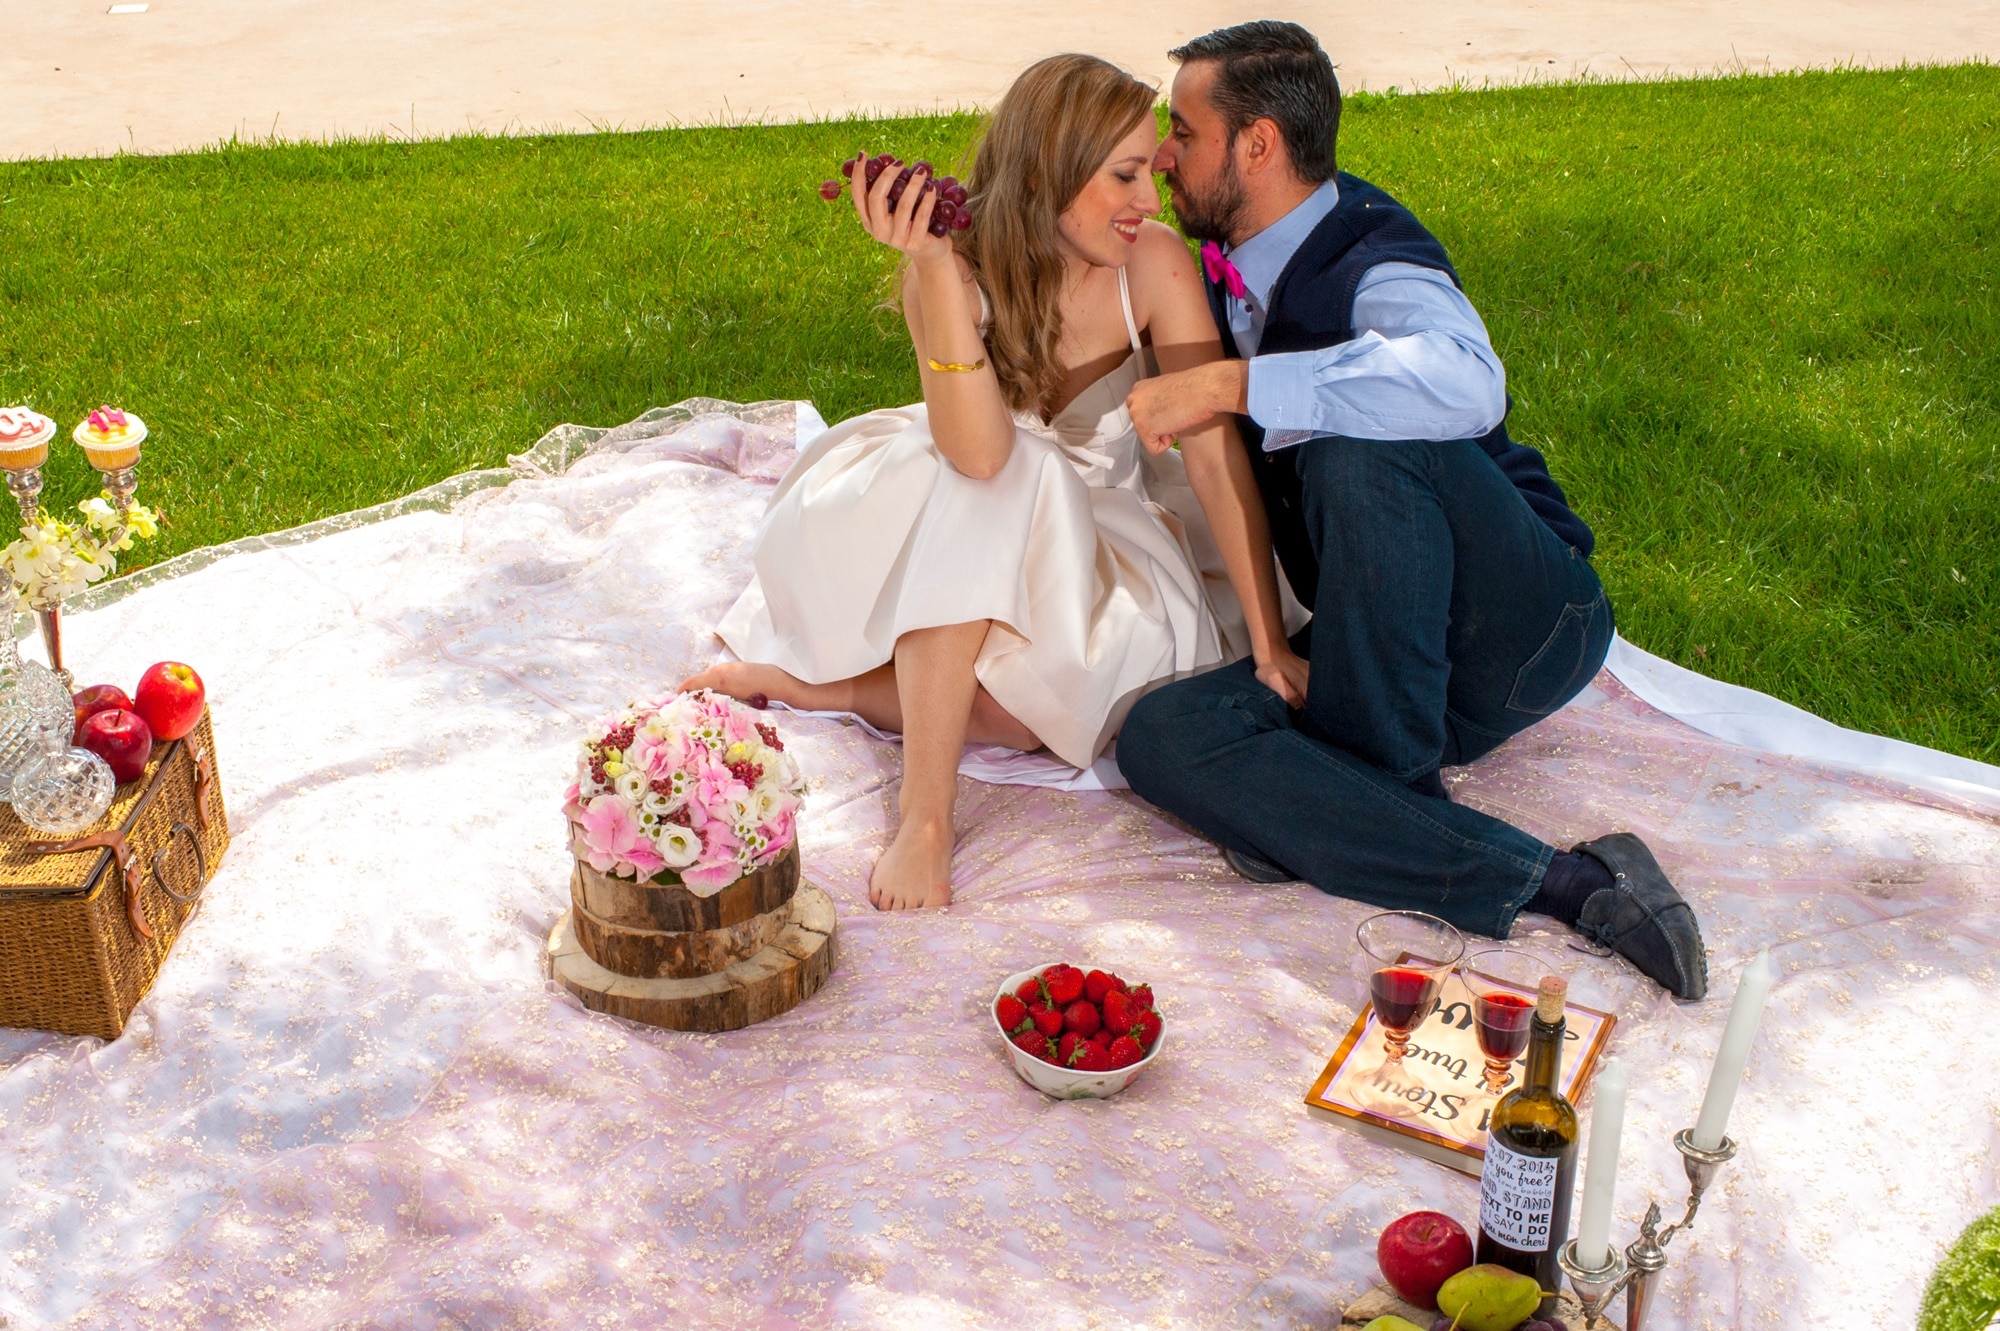 A pic nic love story